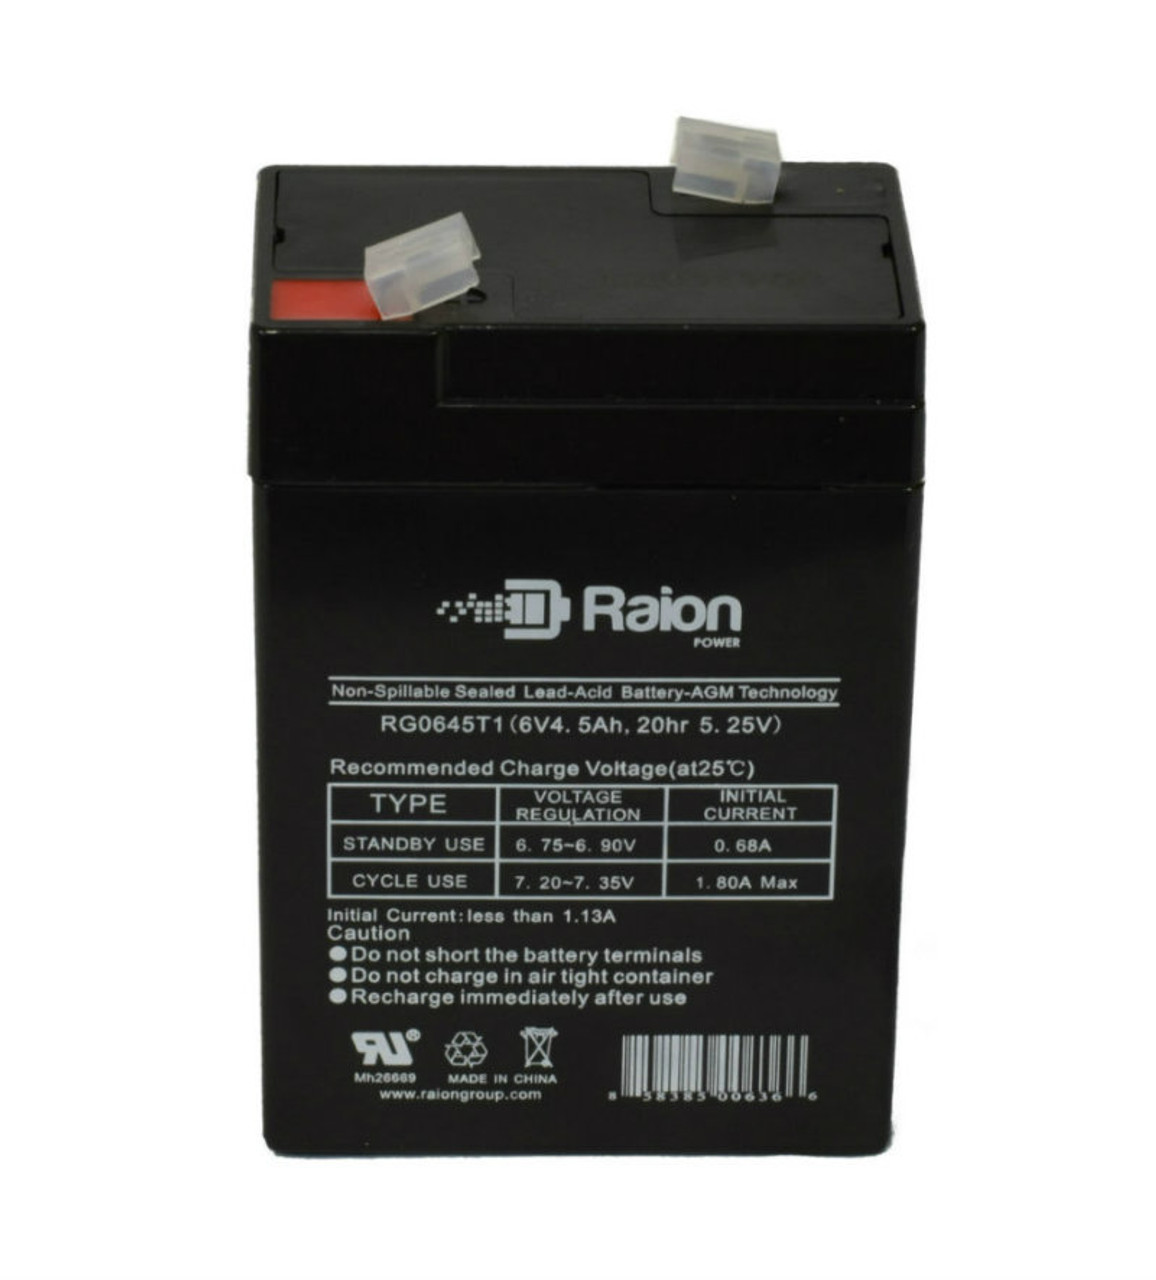 Raion Power RG0645T1 Replacement Battery Cartridge for Edwards 1601